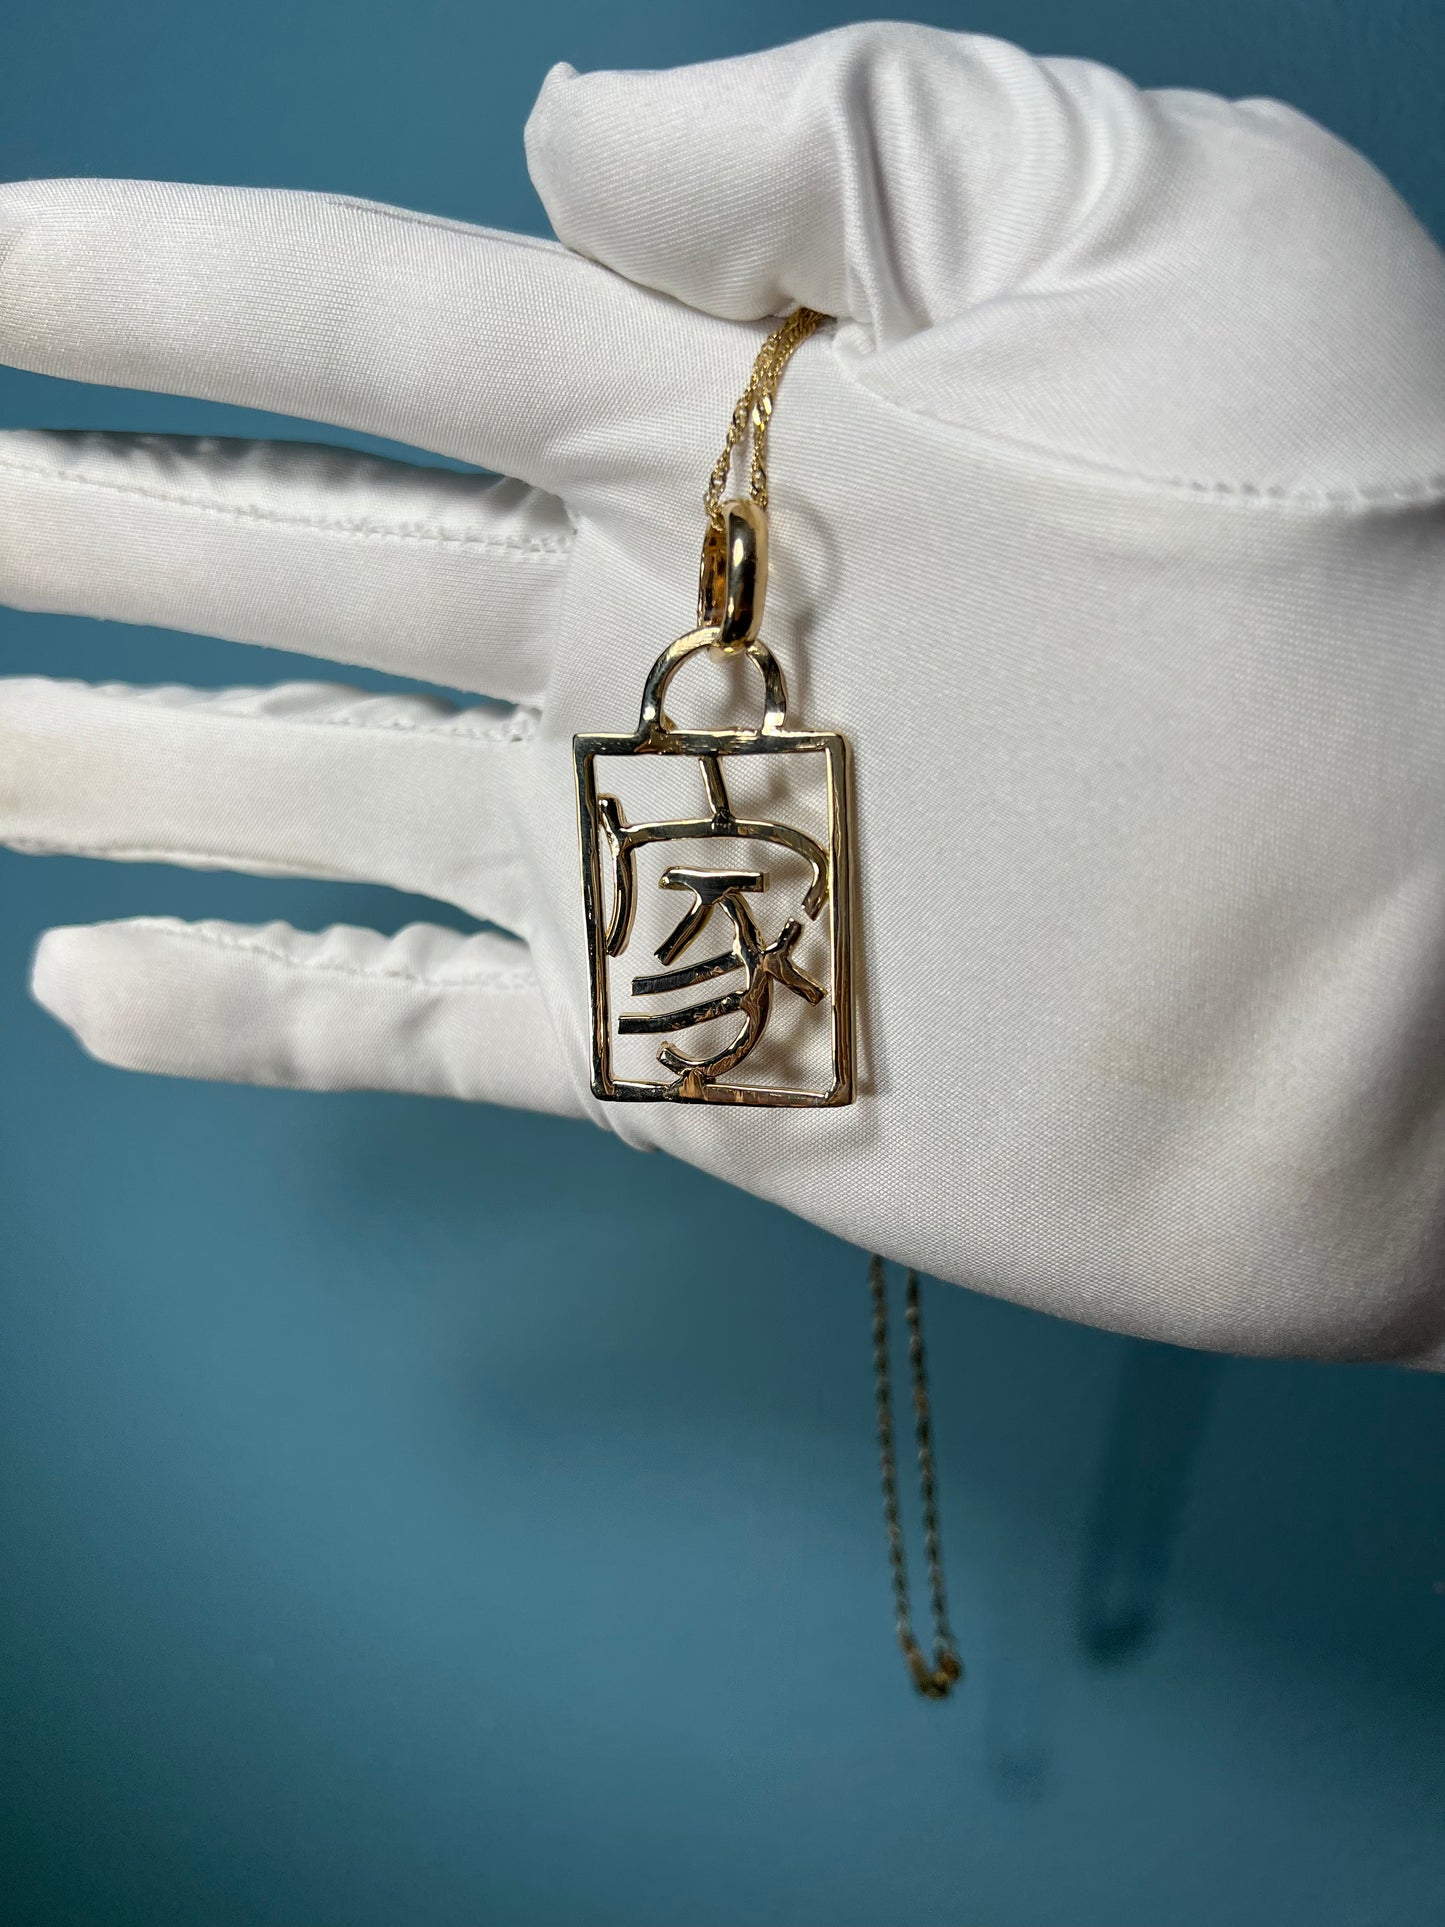 Made-to-order Any Kanji Pendant in 14k Yellow Gold By Maxwell The Jeweler